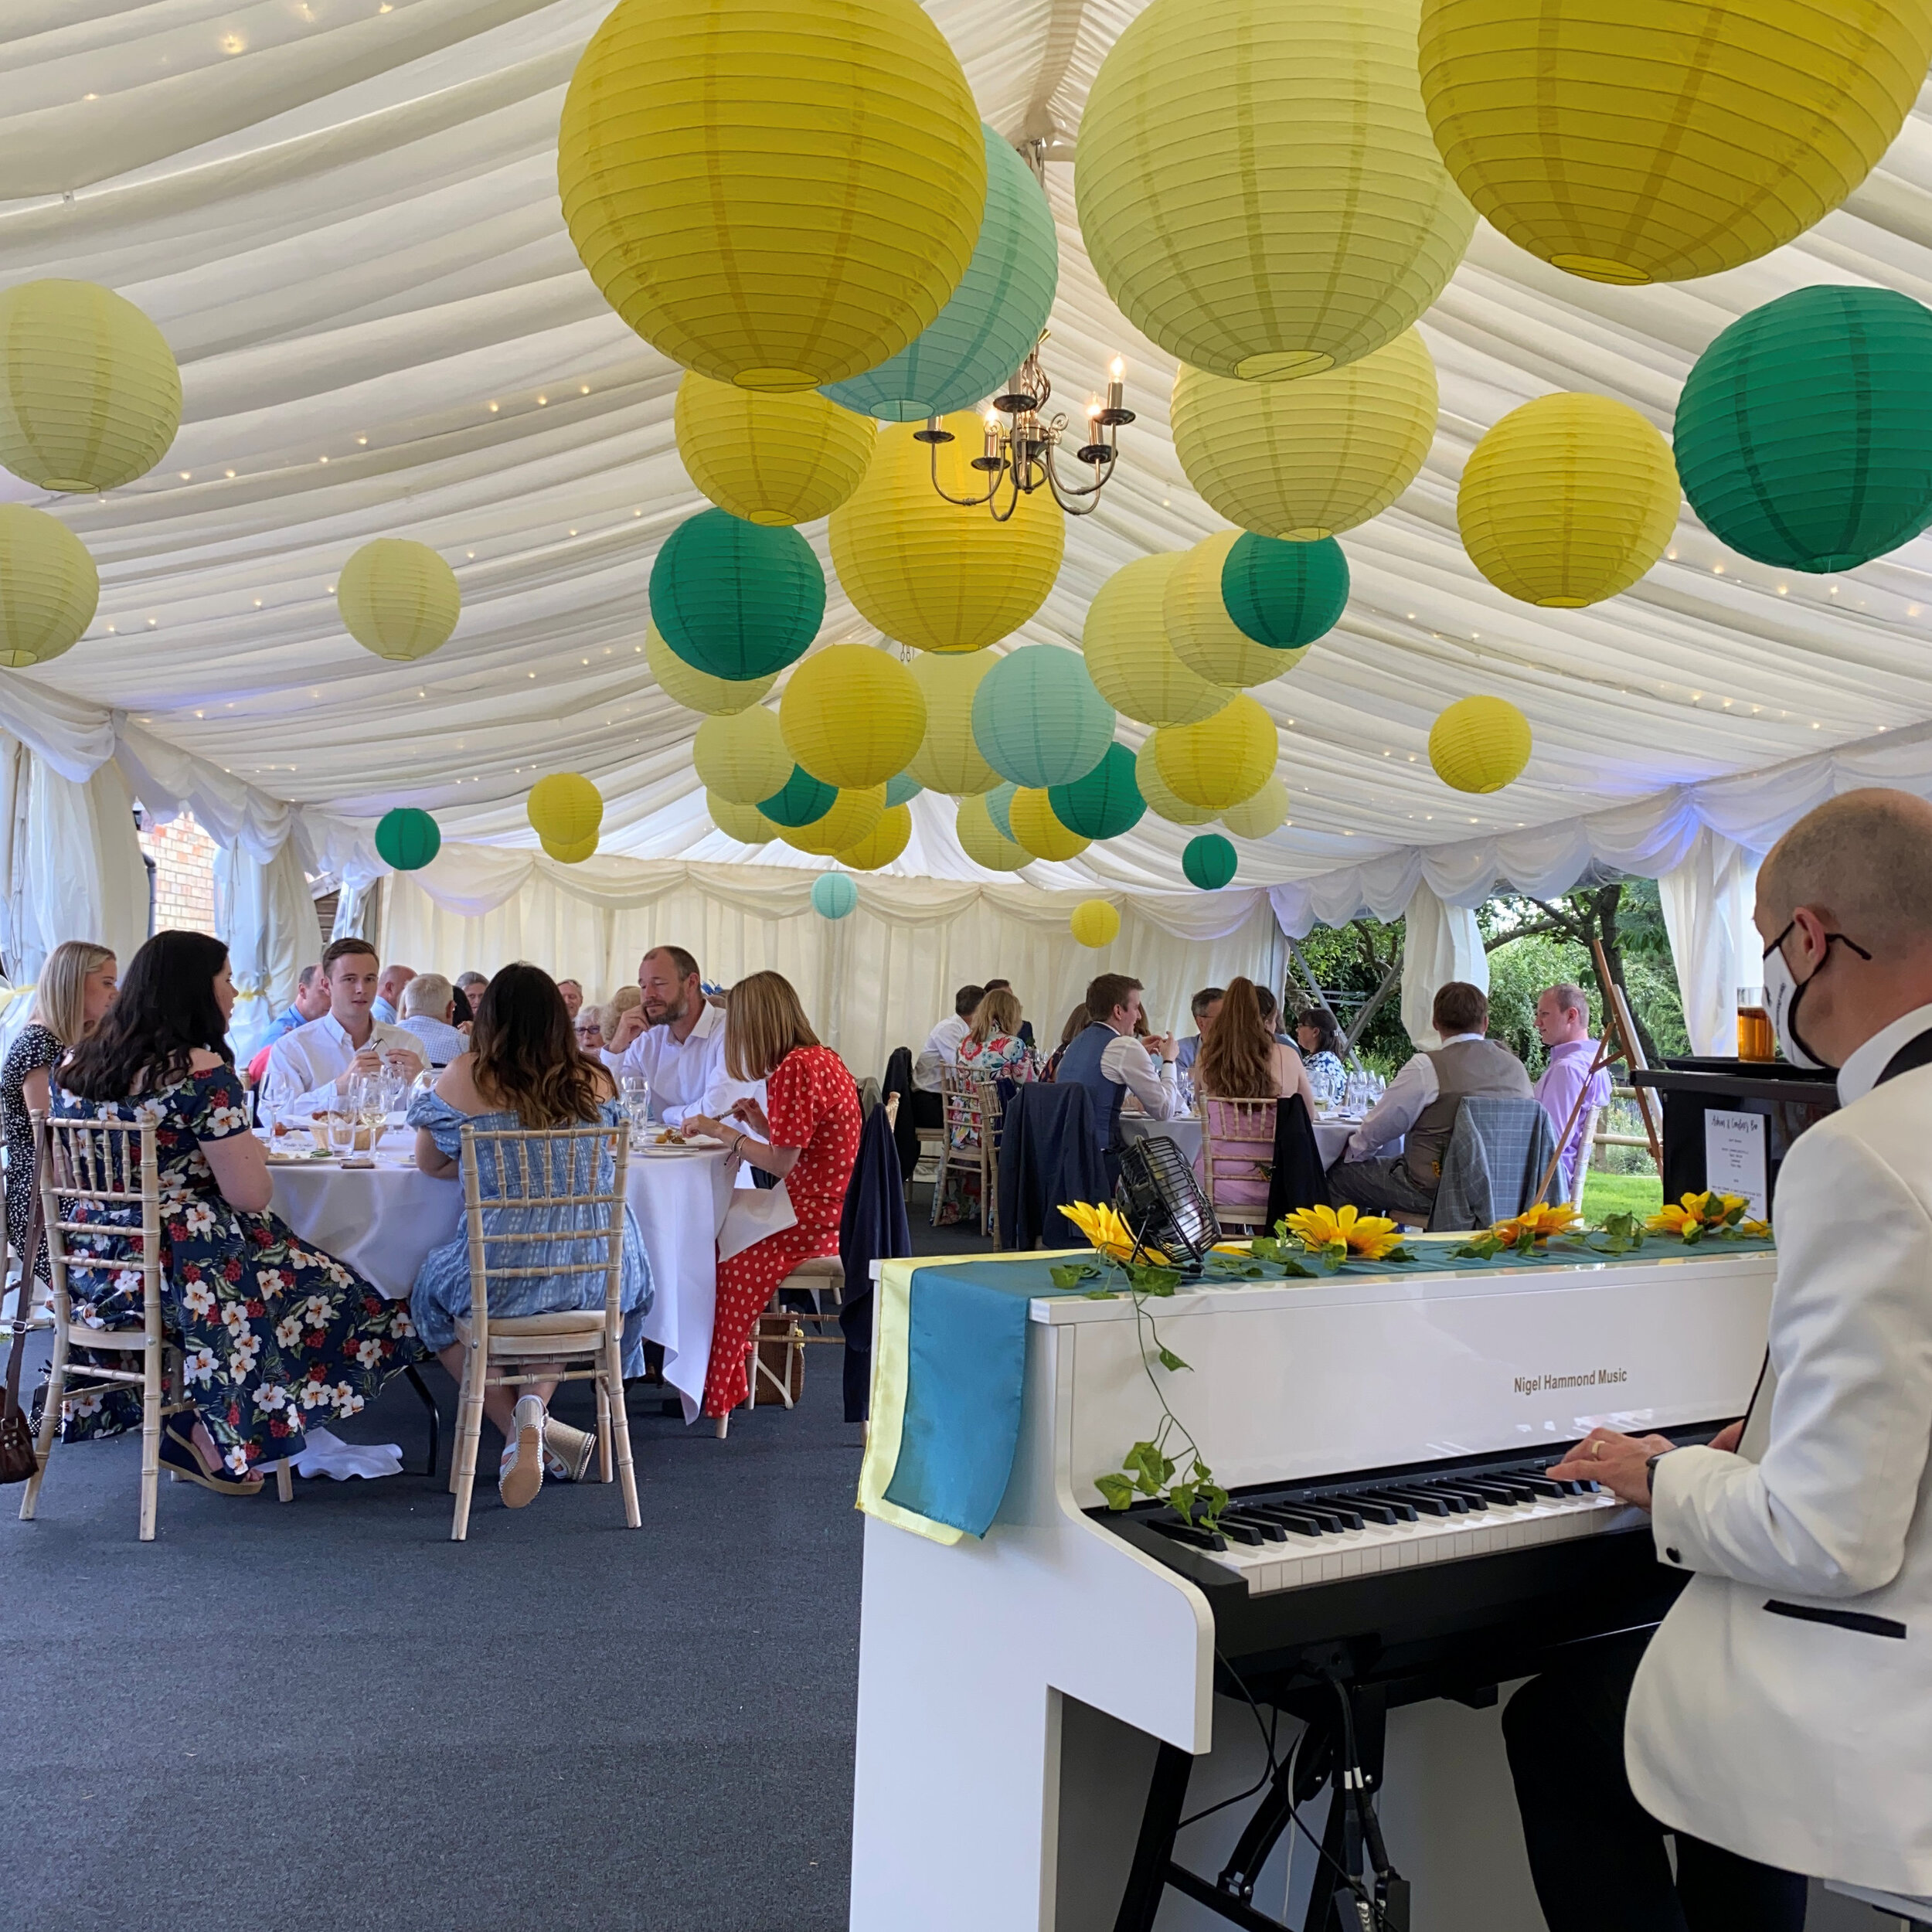 Performing on second mobile piano in marquee for Caroline and Adrian's wedding reception